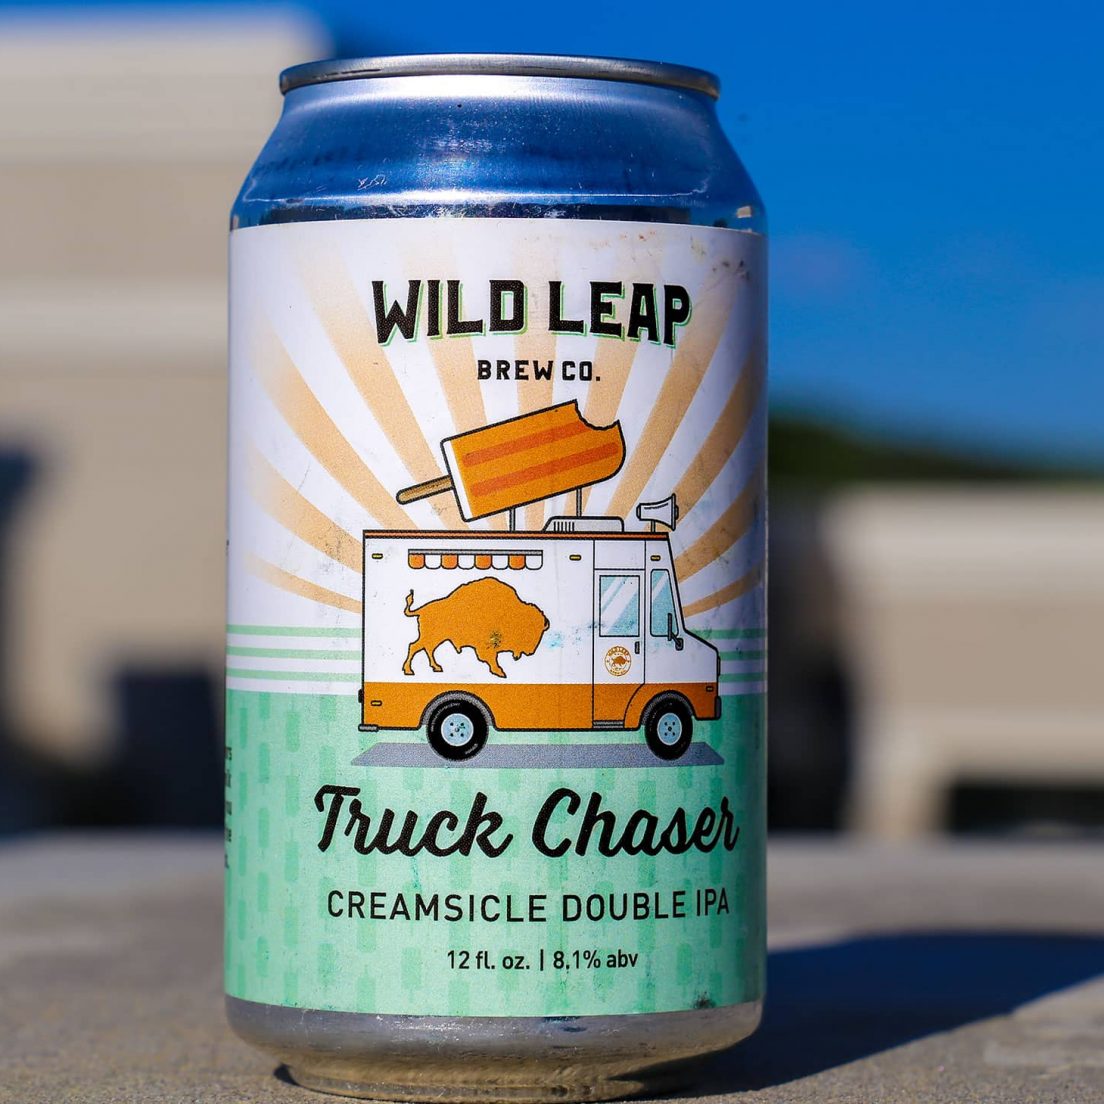 Wild Leap Creamsicle Double IPA can